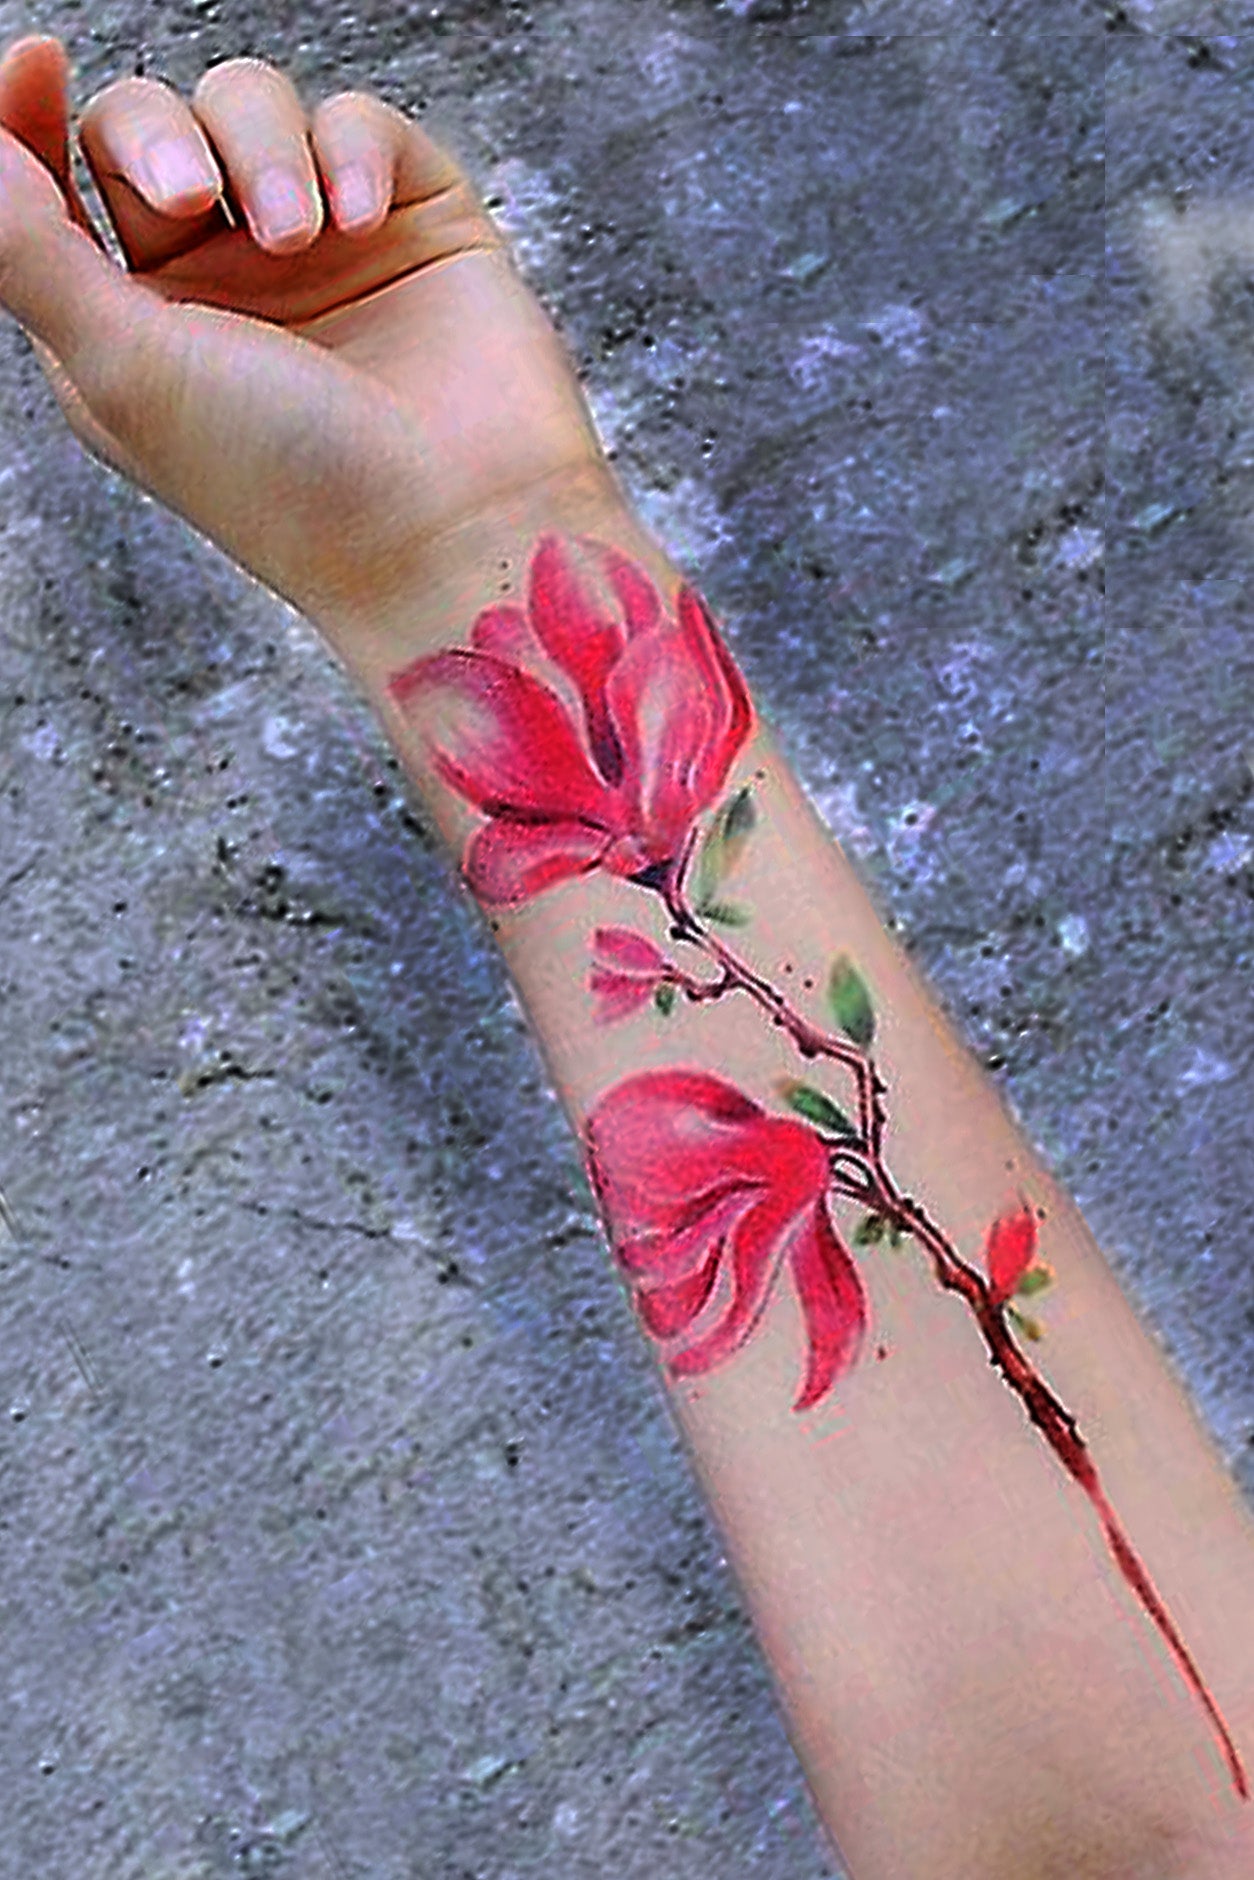 Ladies arm shows the lotus flower tattoo attached to skin, against a dark gray gravel back drop.